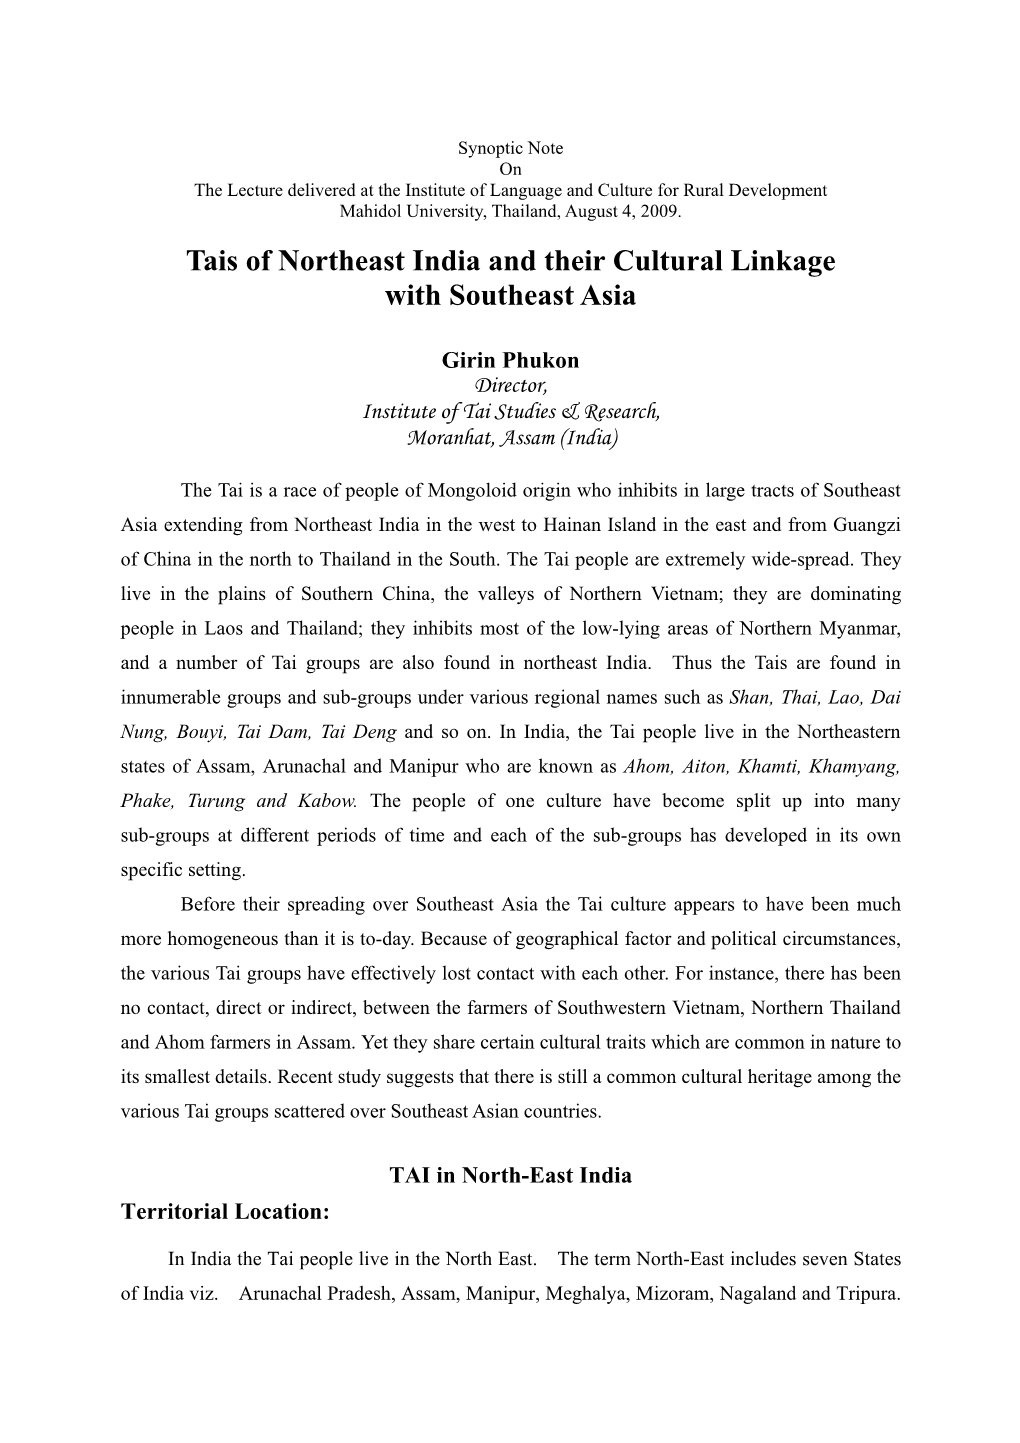 Tais of Northeast India and Their Cultural Linkage with Southeast Asia